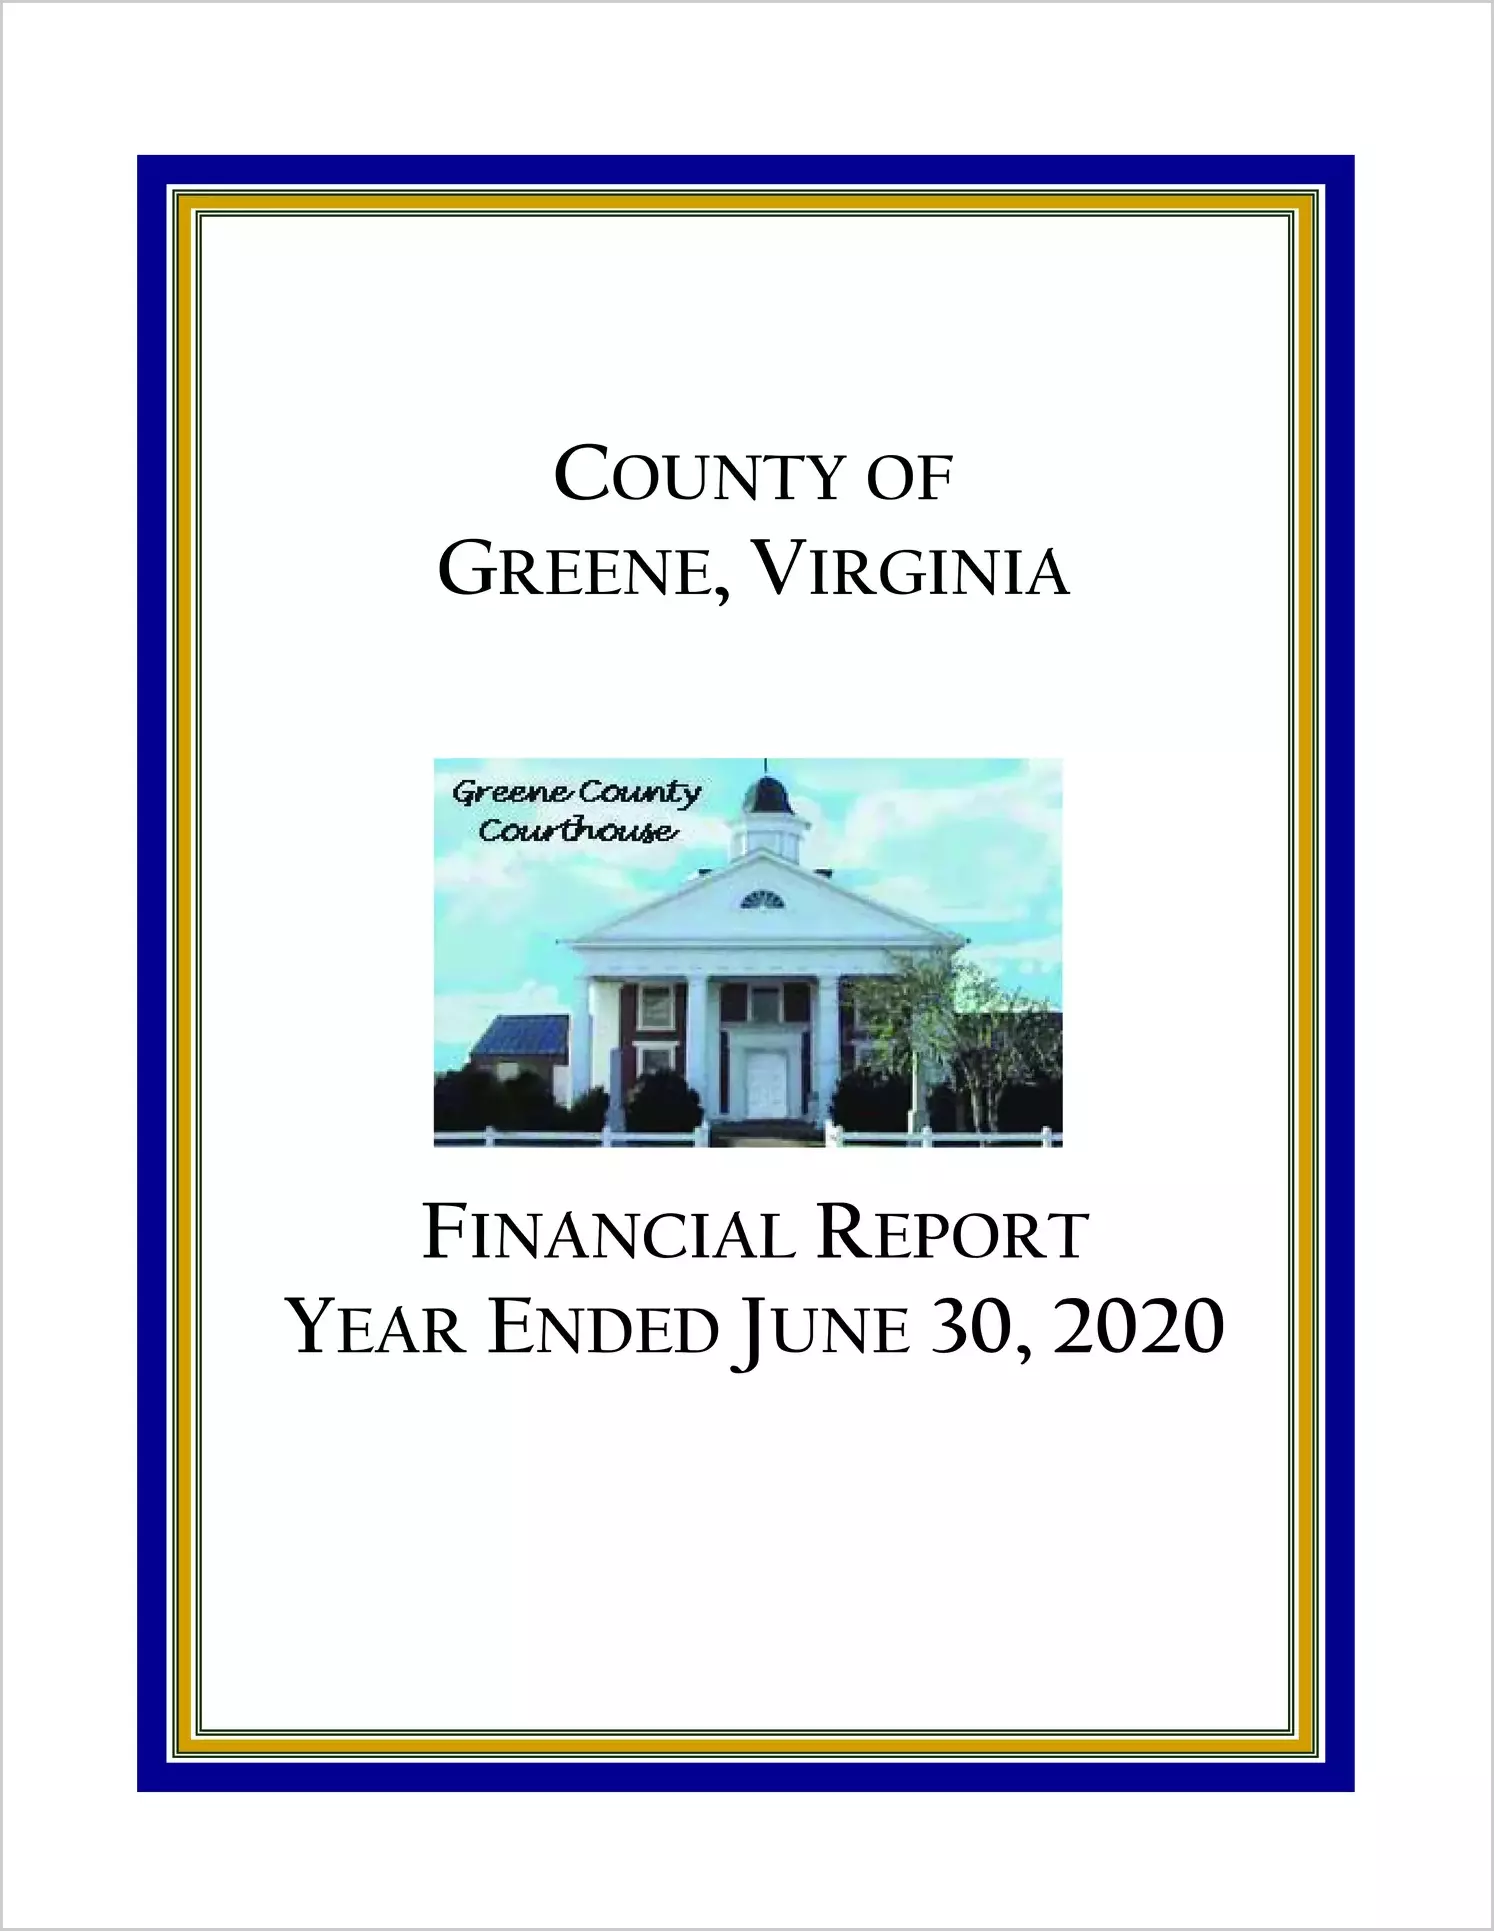 2020 Annual Financial Report for County of Greene